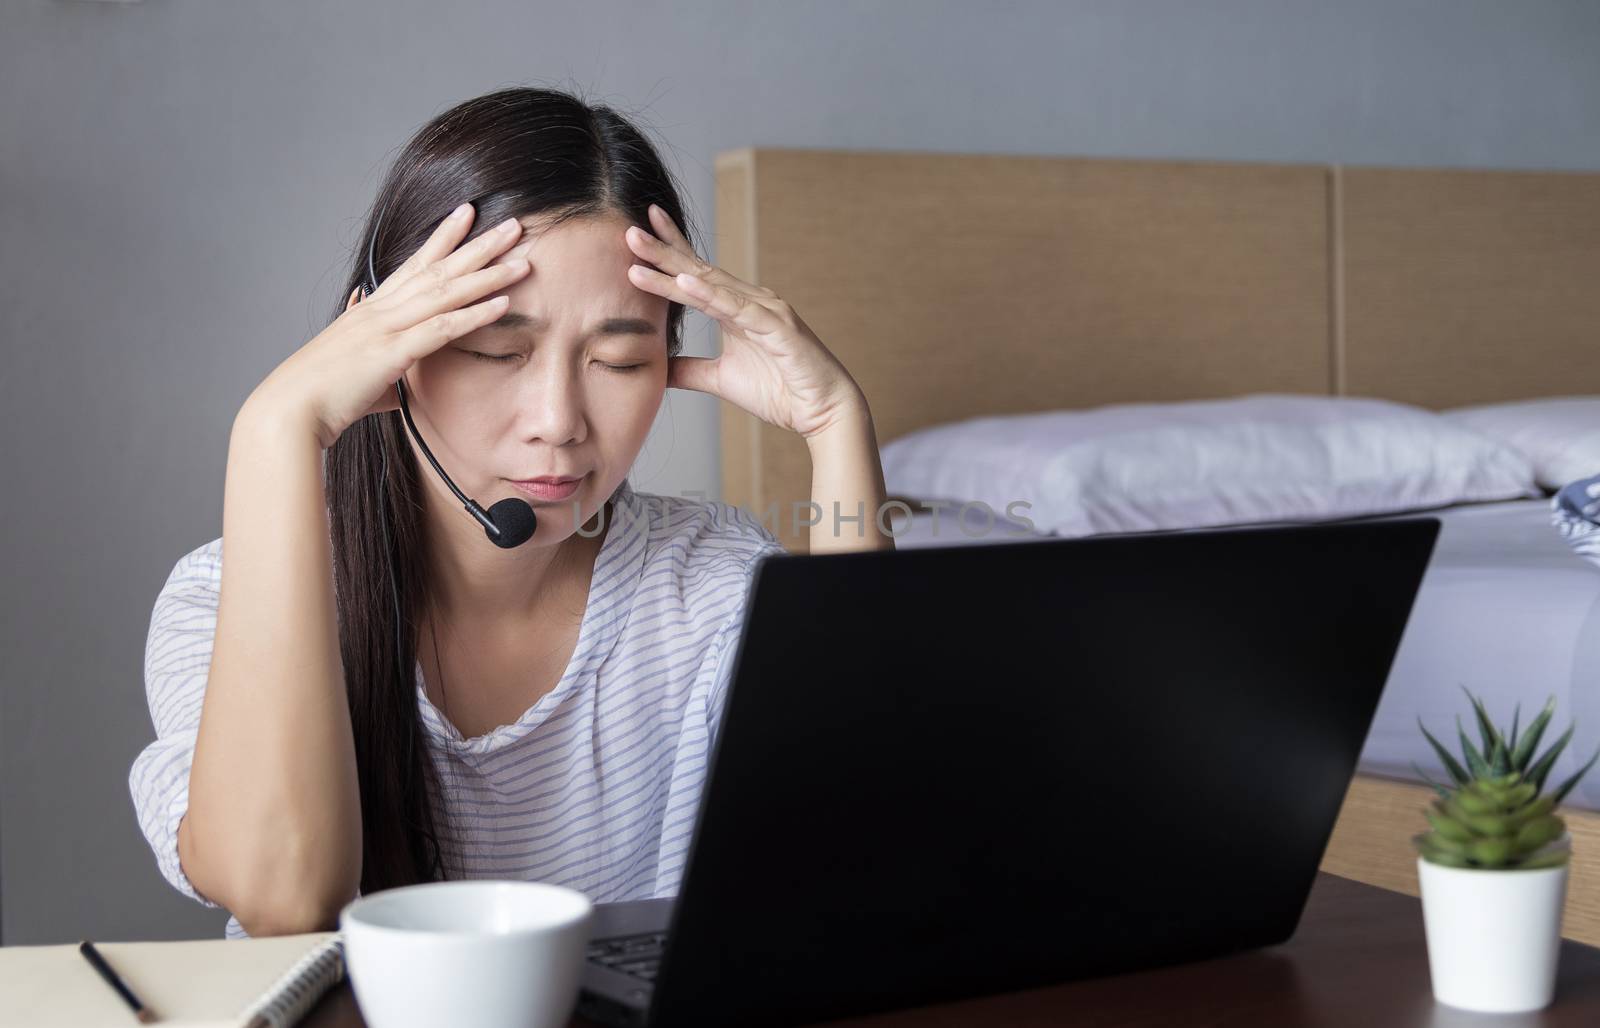 Asian woman working at home with headset making video conference with colleagues via laptop computer with stress emotion during transmission of COVID-19 Coronavirus outbreak, the new normal concept